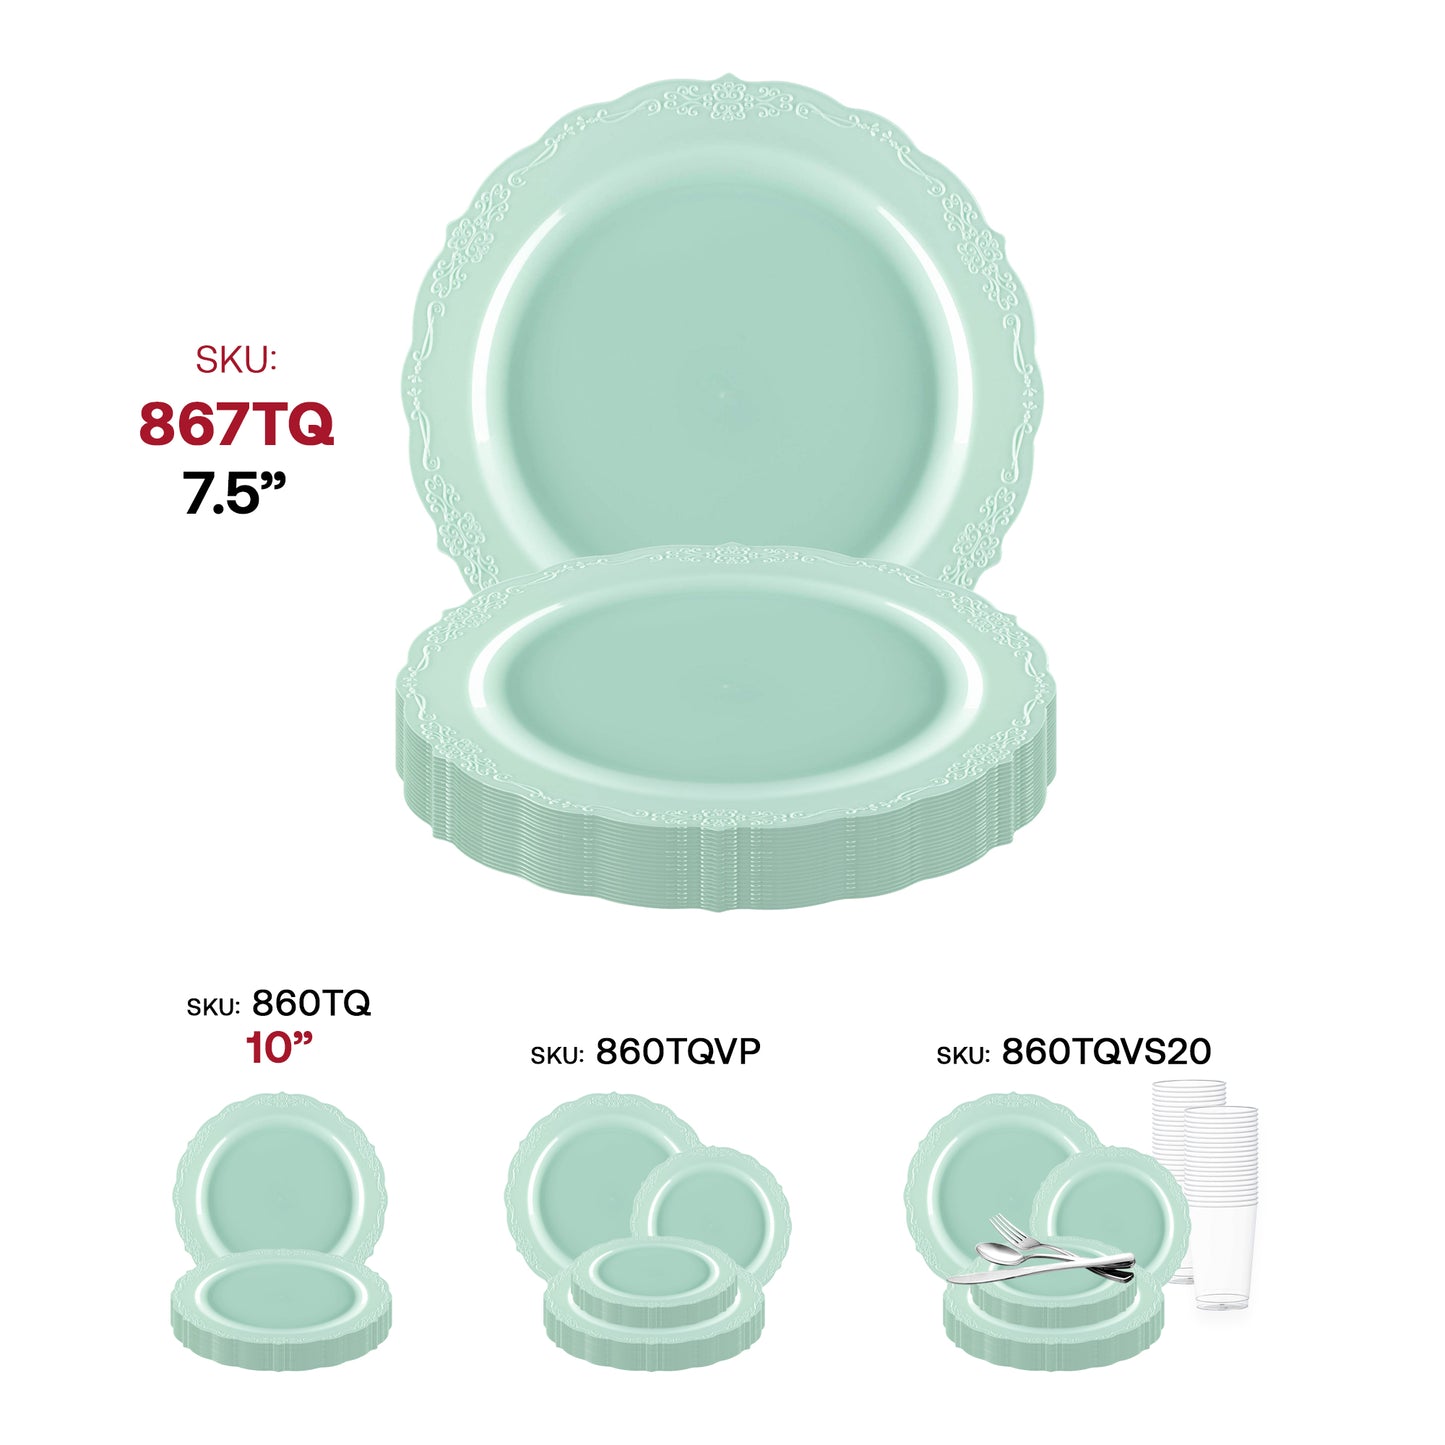 Turquoise Vintage Round Disposable Plastic Appetizer/Salad Plates (7.5") SKU | The Kaya Collection